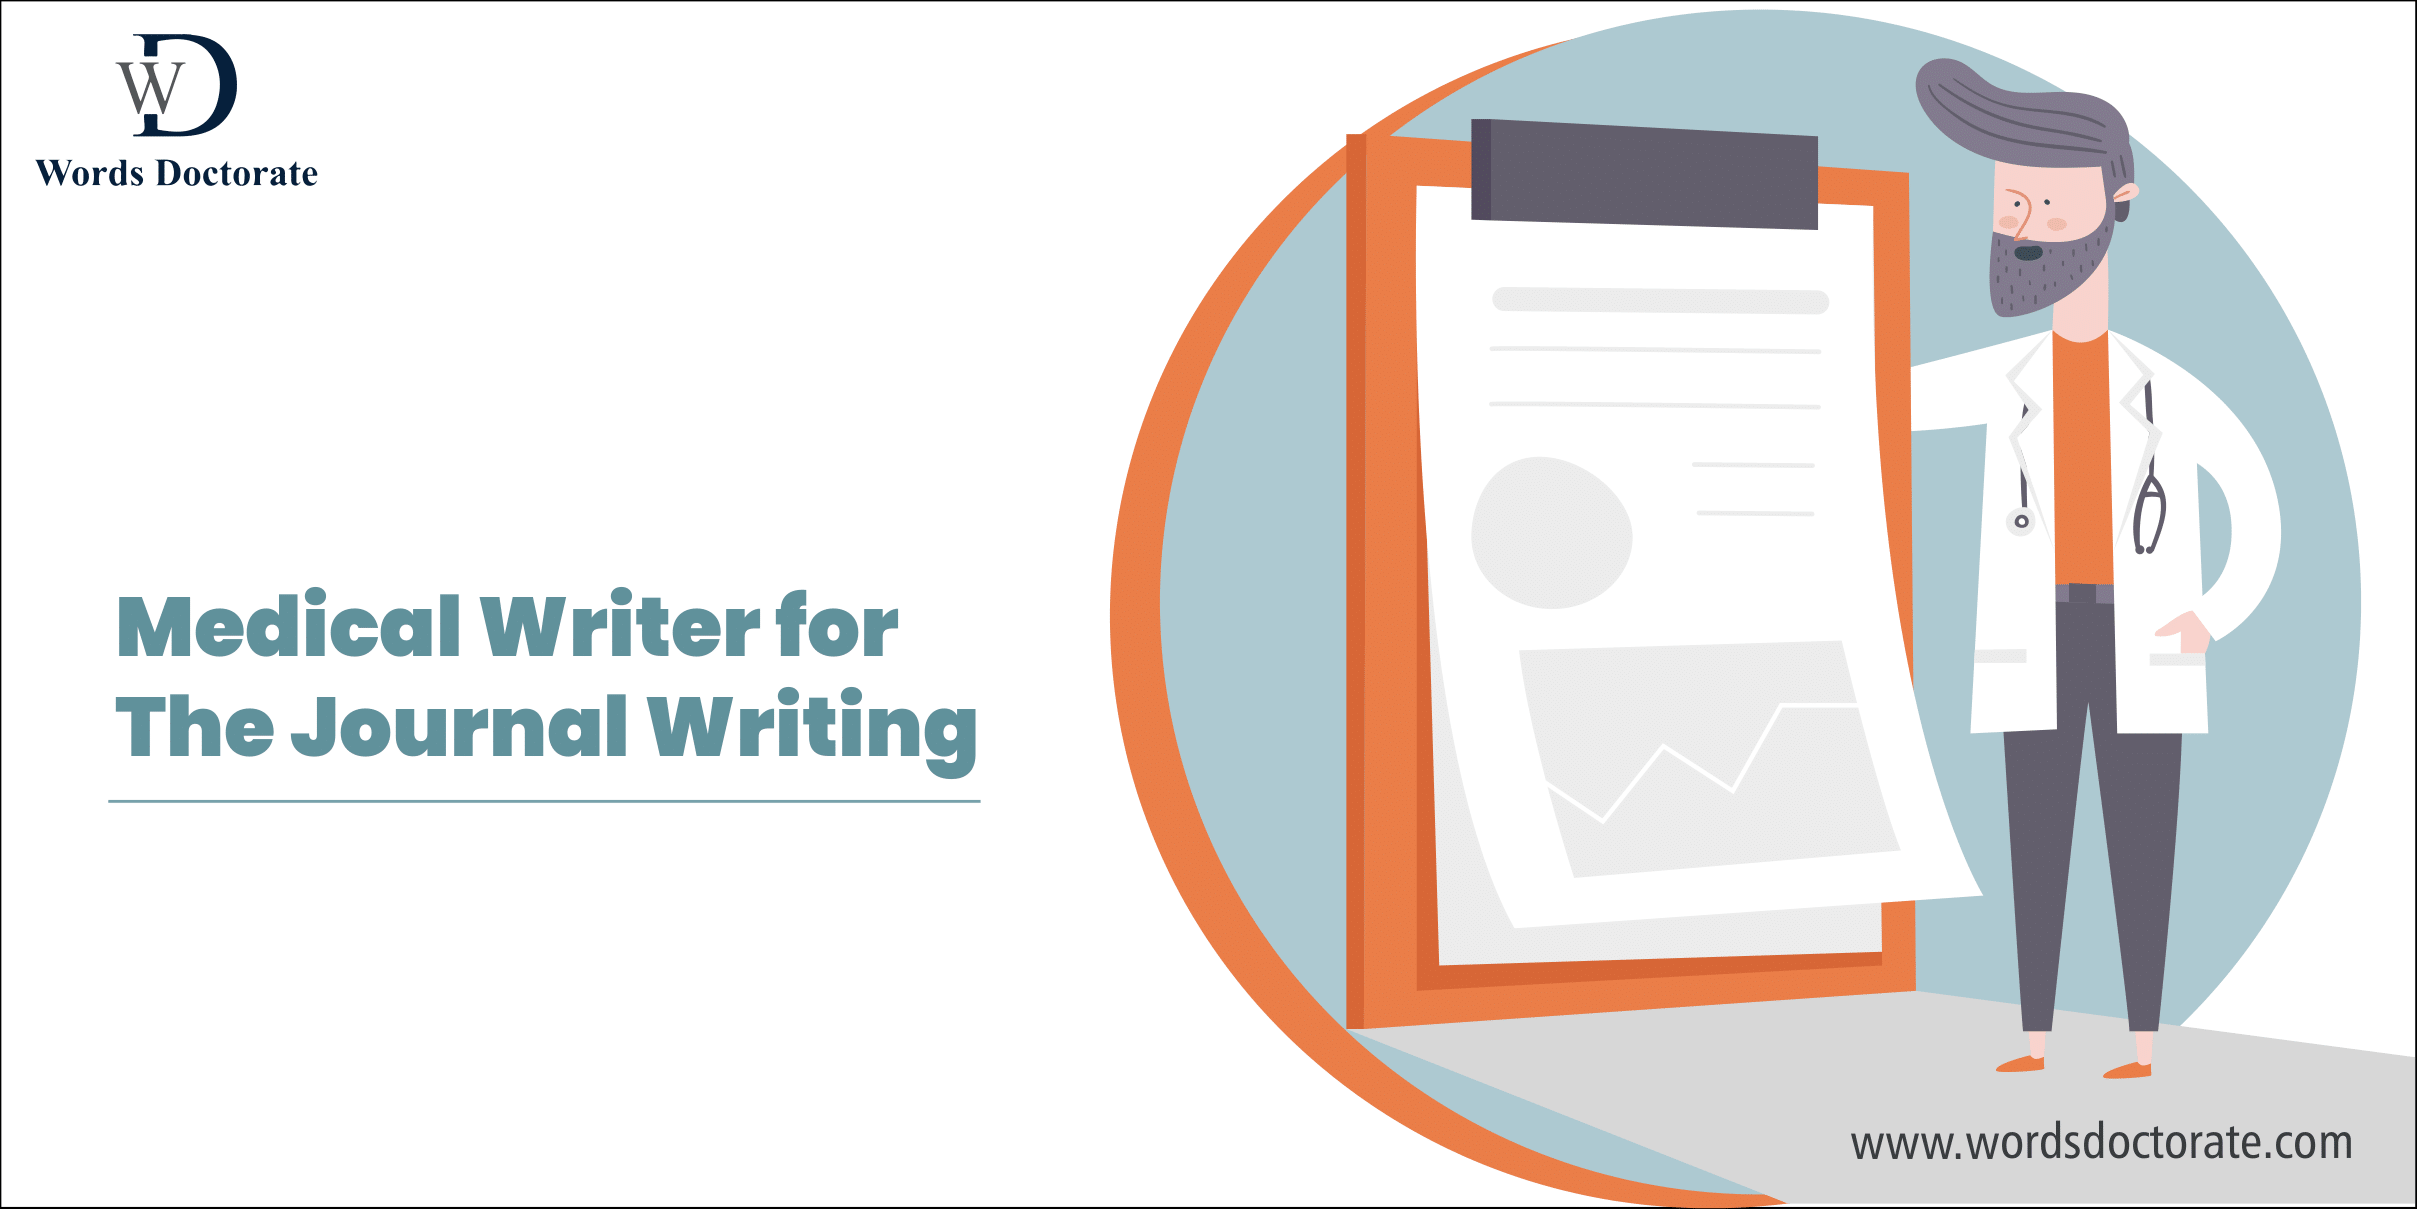 Medical Writer for The Journal Writing